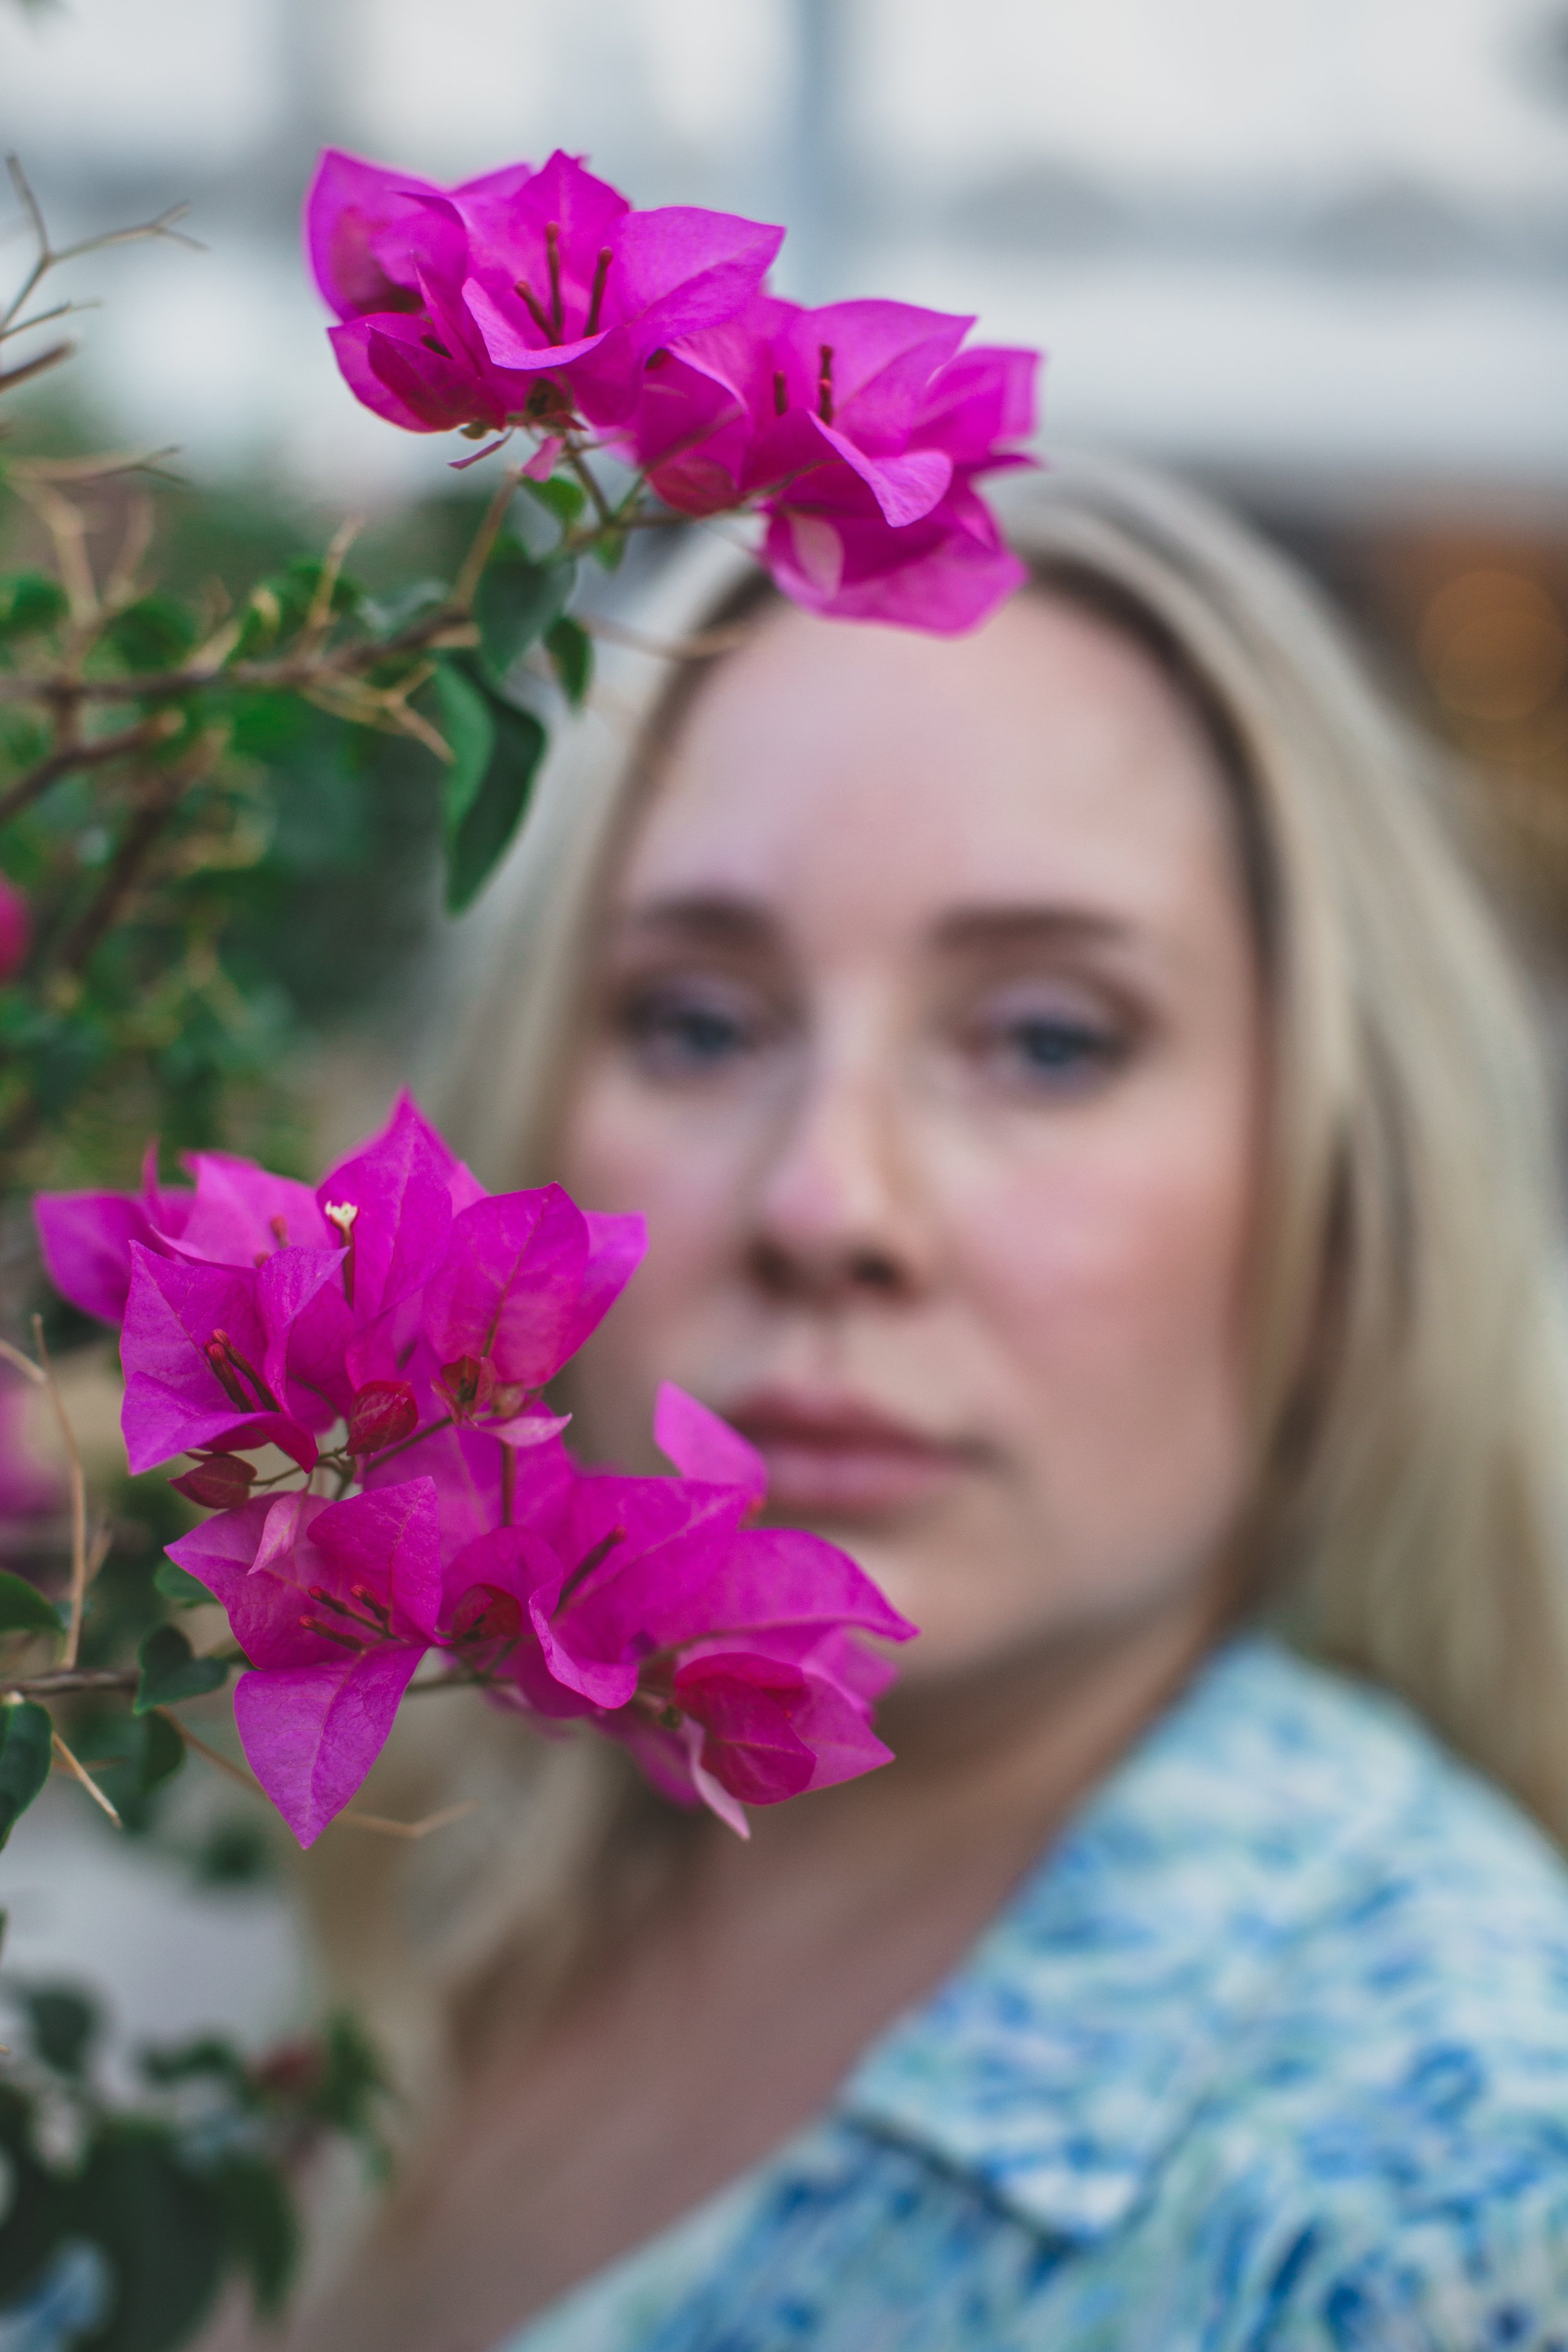 Woman poses behind flowers for the #portraitproject by Creative Phoenix Photographer; Jennifer Lind Schutsky.